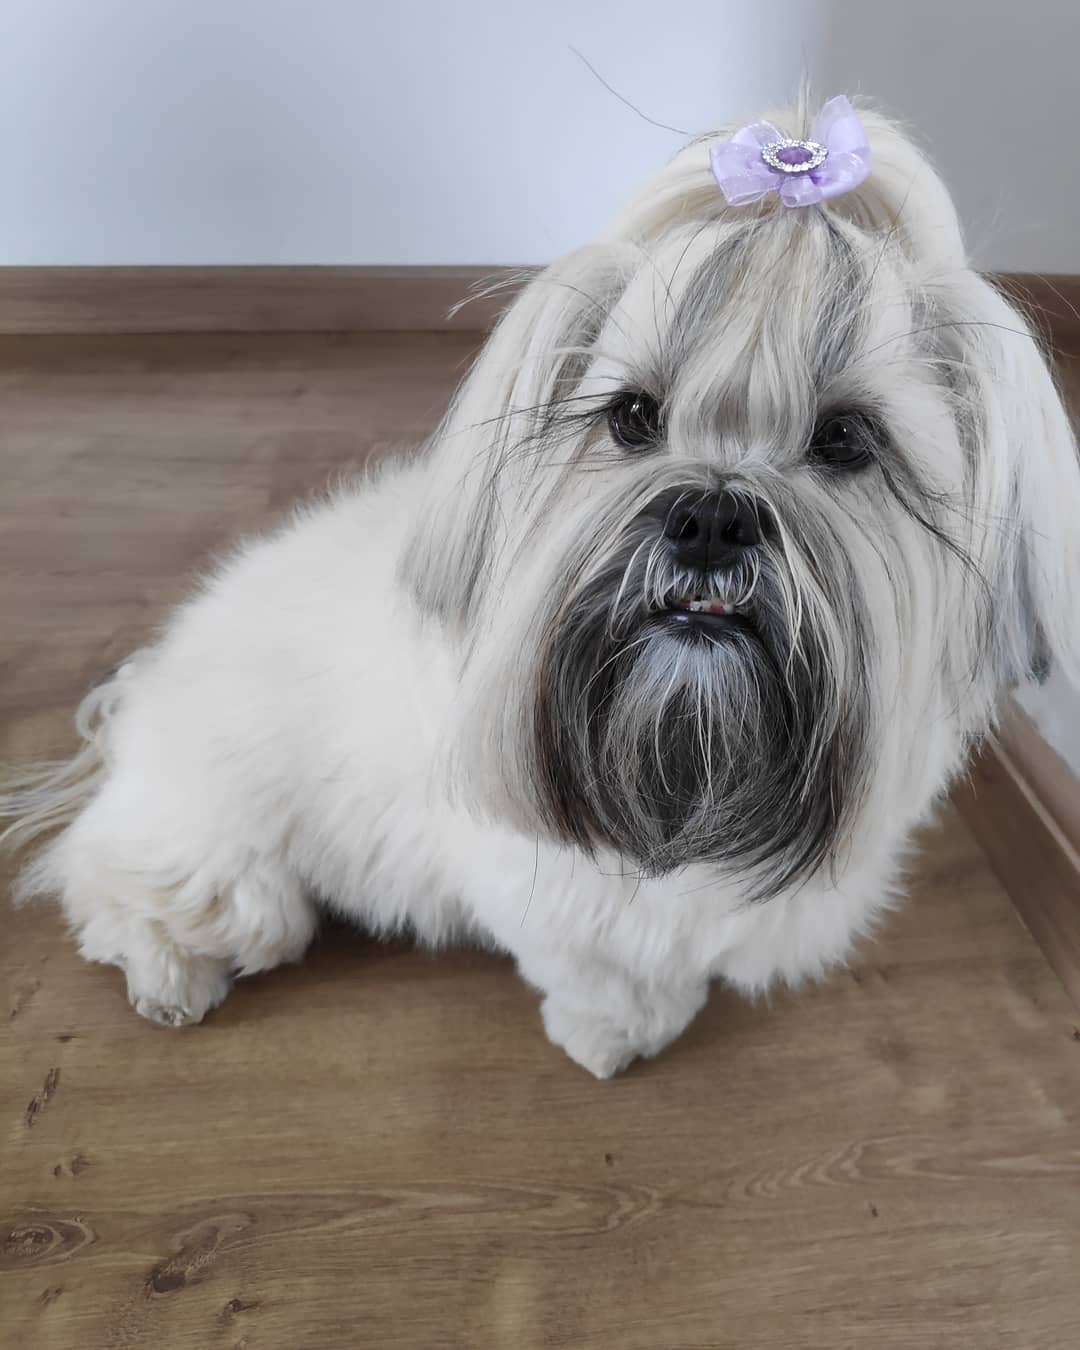 A Lhasa Apso wearing purple hair tie on top of its head while sitting on the floor